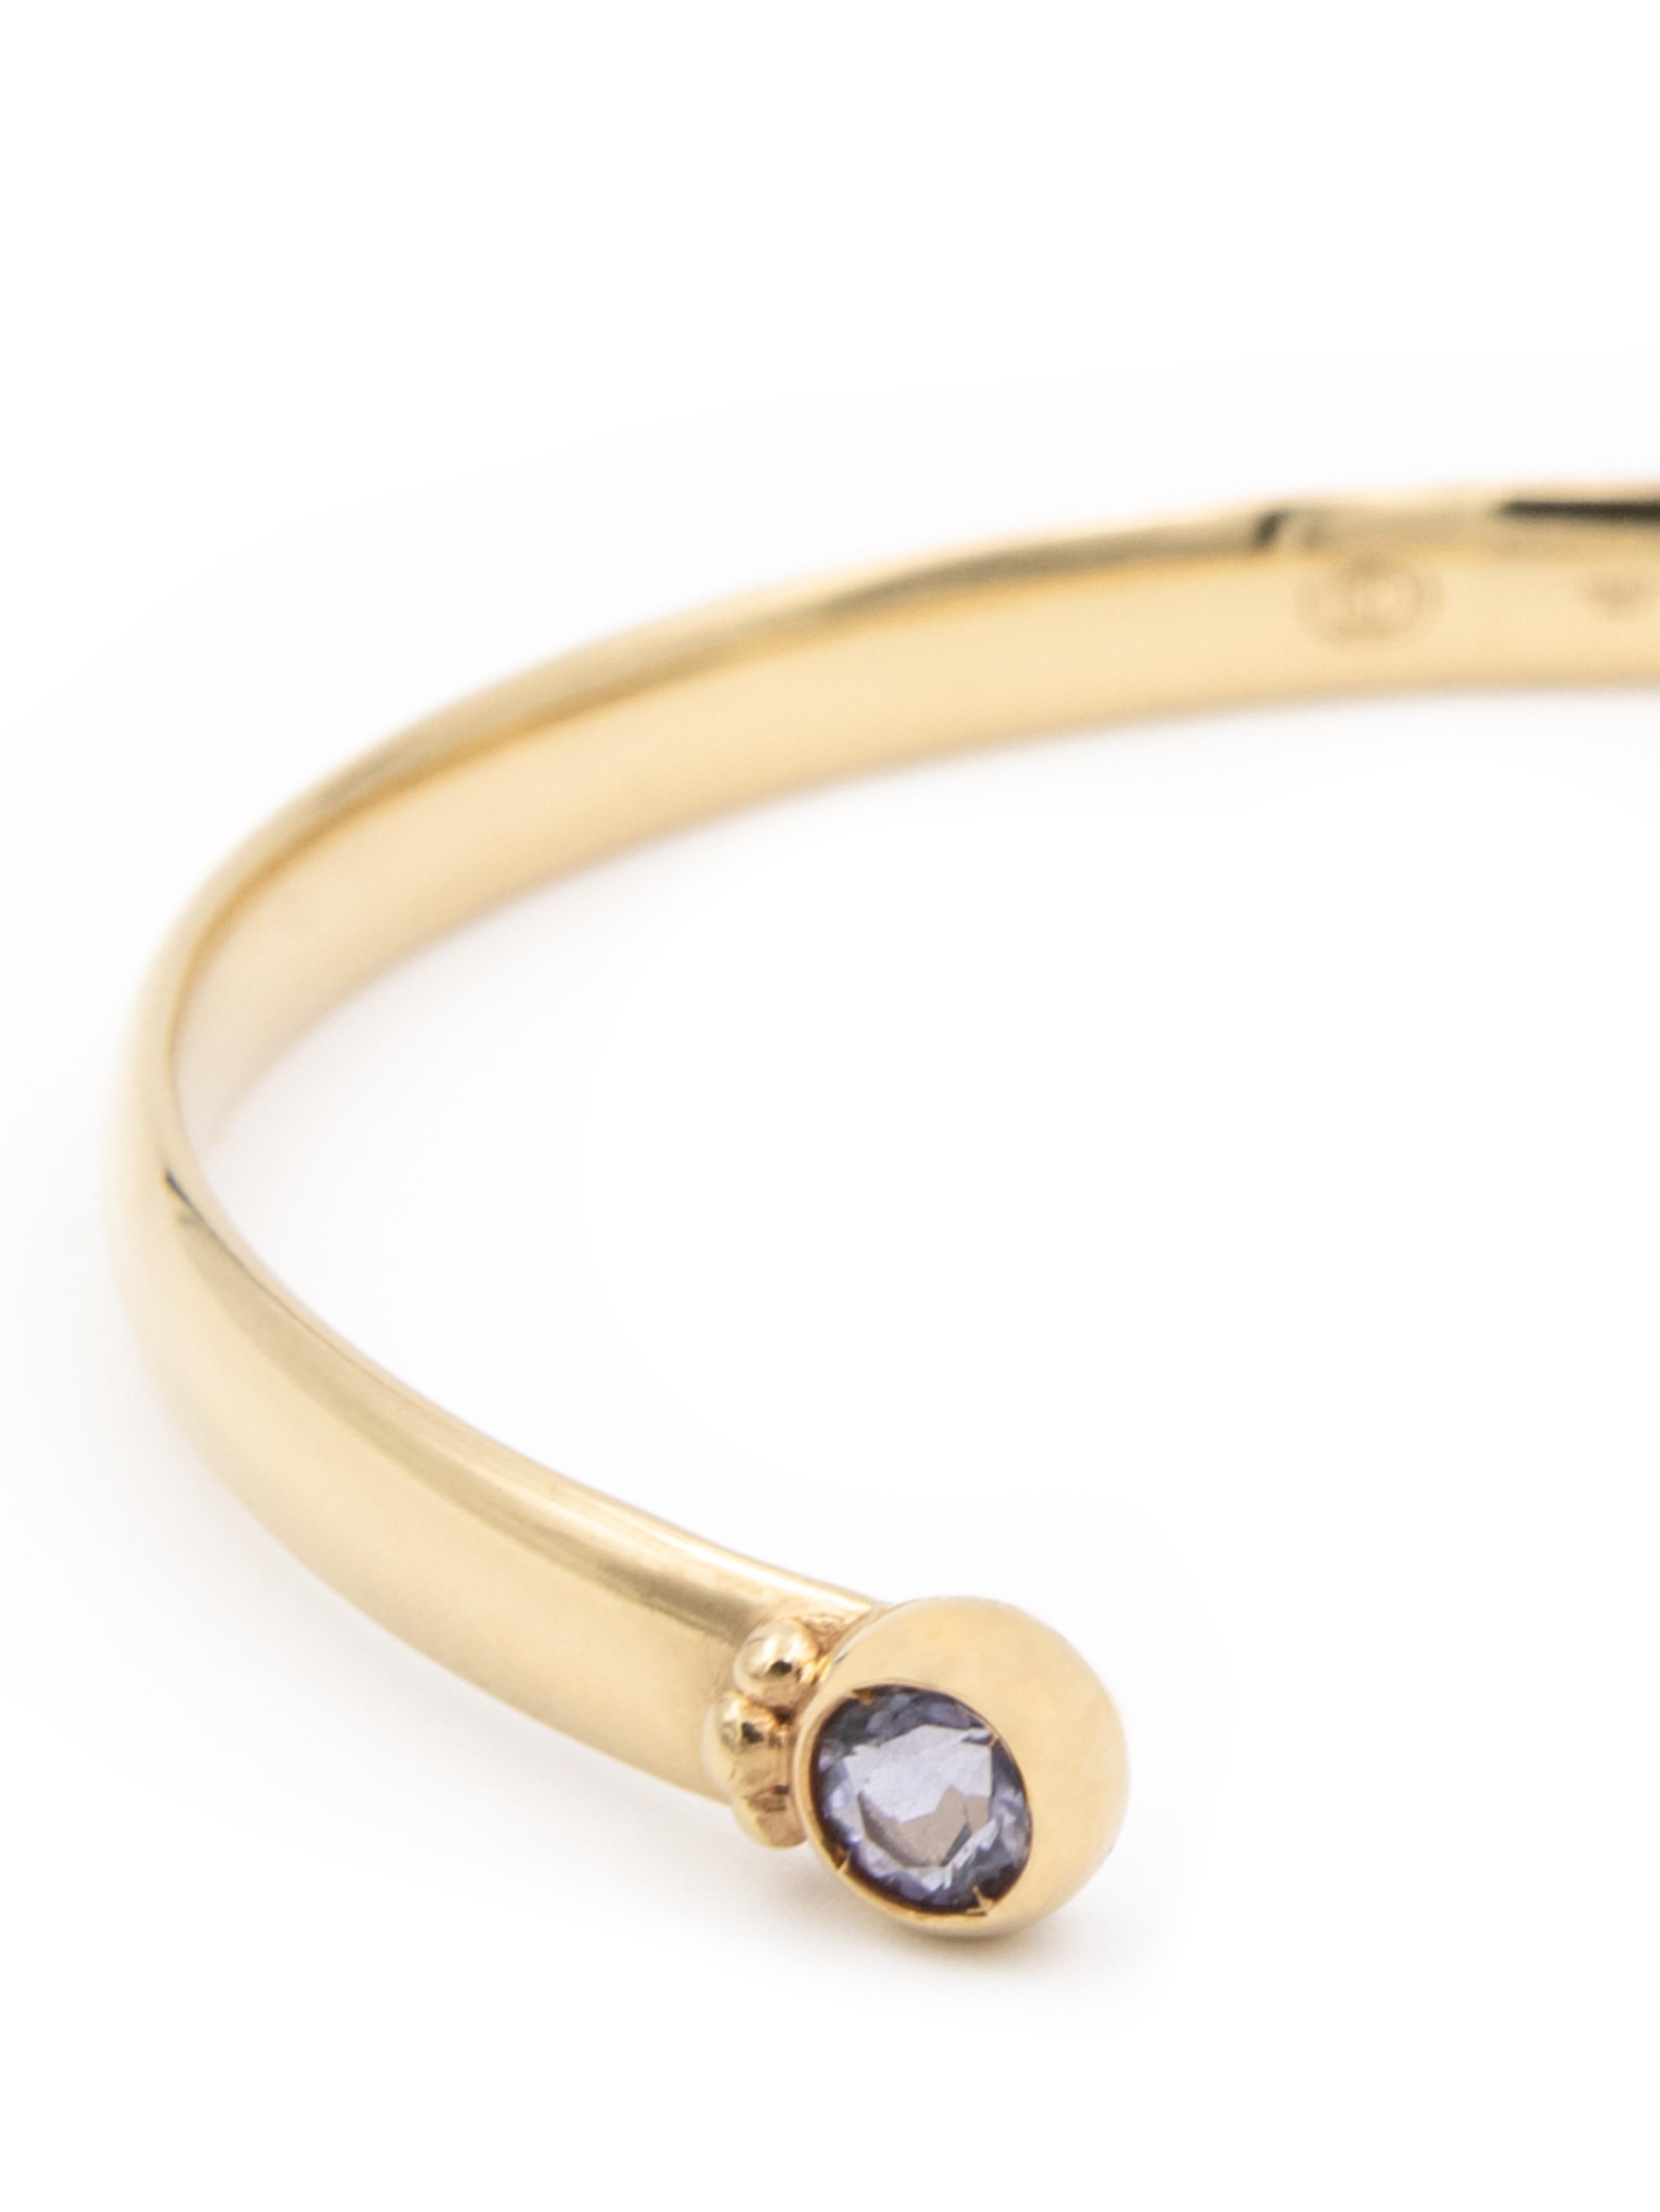 18 karat yellow gold open stacking bracelet with two round iolite stones measuring 4 mm each.  
  
Perfect worn alone or for stacking with the other stacking bracelets in the Mezzanotte Milano collection.

This bracelet forms part of Julia-Didon